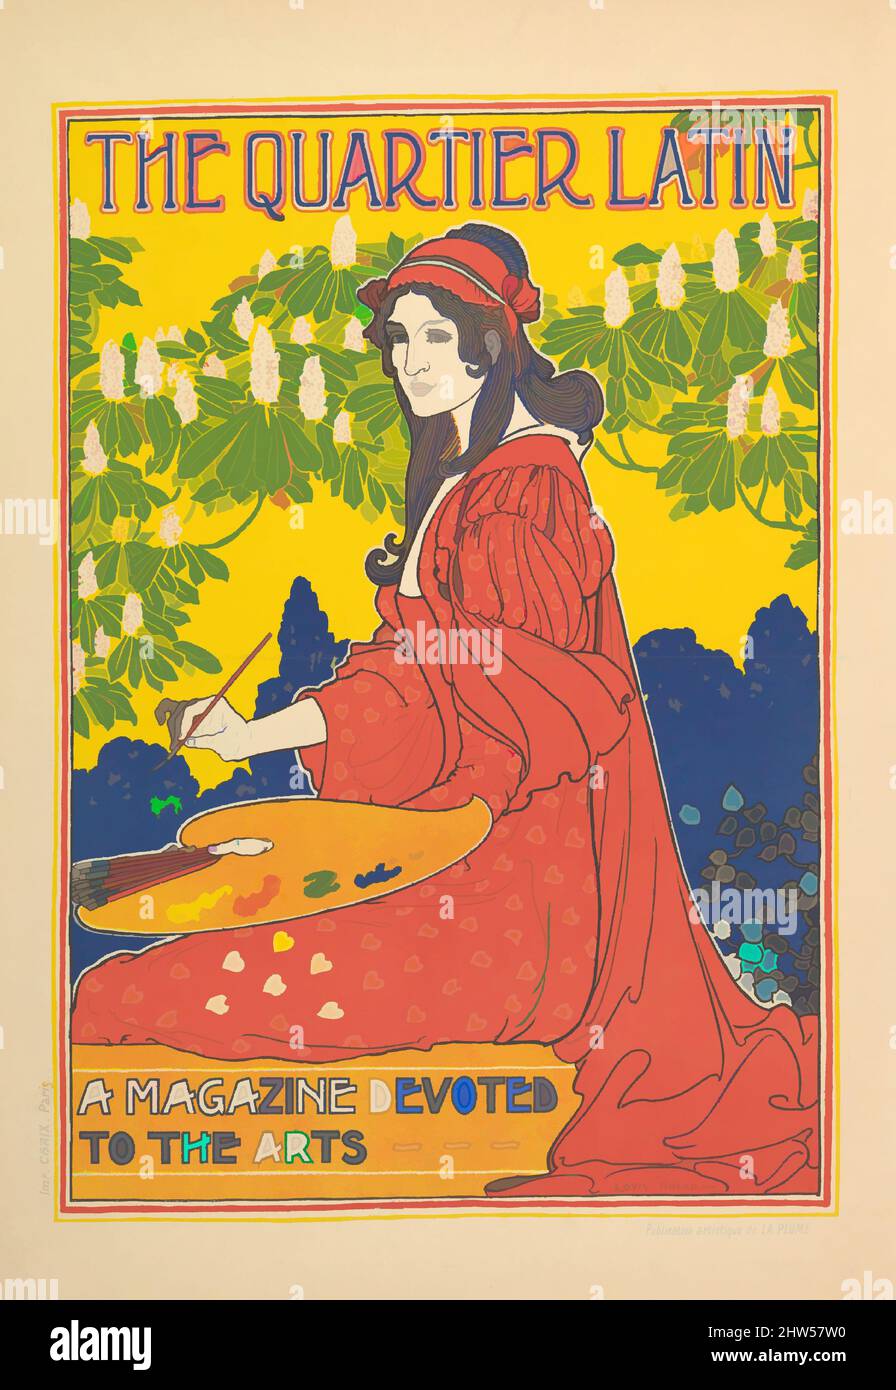 Art inspired by The Quartier Latin: A Magazine Devoted to The Arts, ca. 1898–99, Lithograph, Sheet: 23 3/4 × 16 7/16 in. (60.3 × 41.8 cm), Prints, Louis John Rhead (American, born England, 1857–1926, Classic works modernized by Artotop with a splash of modernity. Shapes, color and value, eye-catching visual impact on art. Emotions through freedom of artworks in a contemporary way. A timeless message pursuing a wildly creative new direction. Artists turning to the digital medium and creating the Artotop NFT Stock Photo